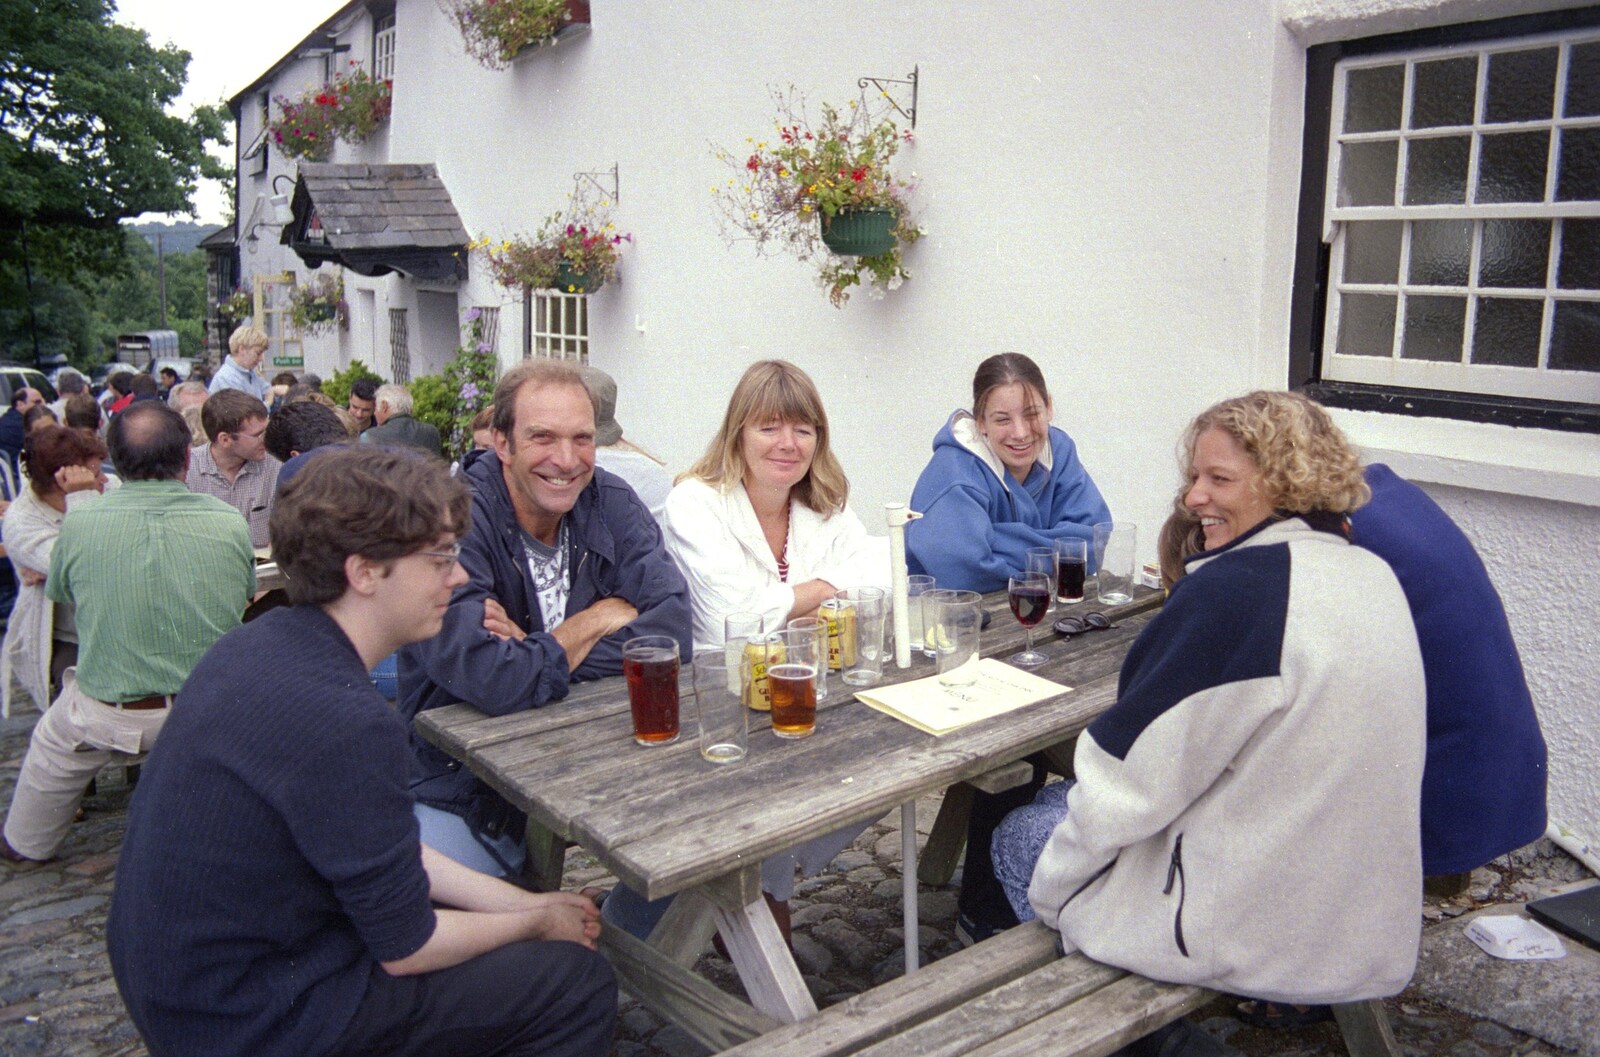 Outside the Royal Oak in Meavy from A Total Eclipse of the Sun, Hoo Meavy, Devon - 11th August 1999